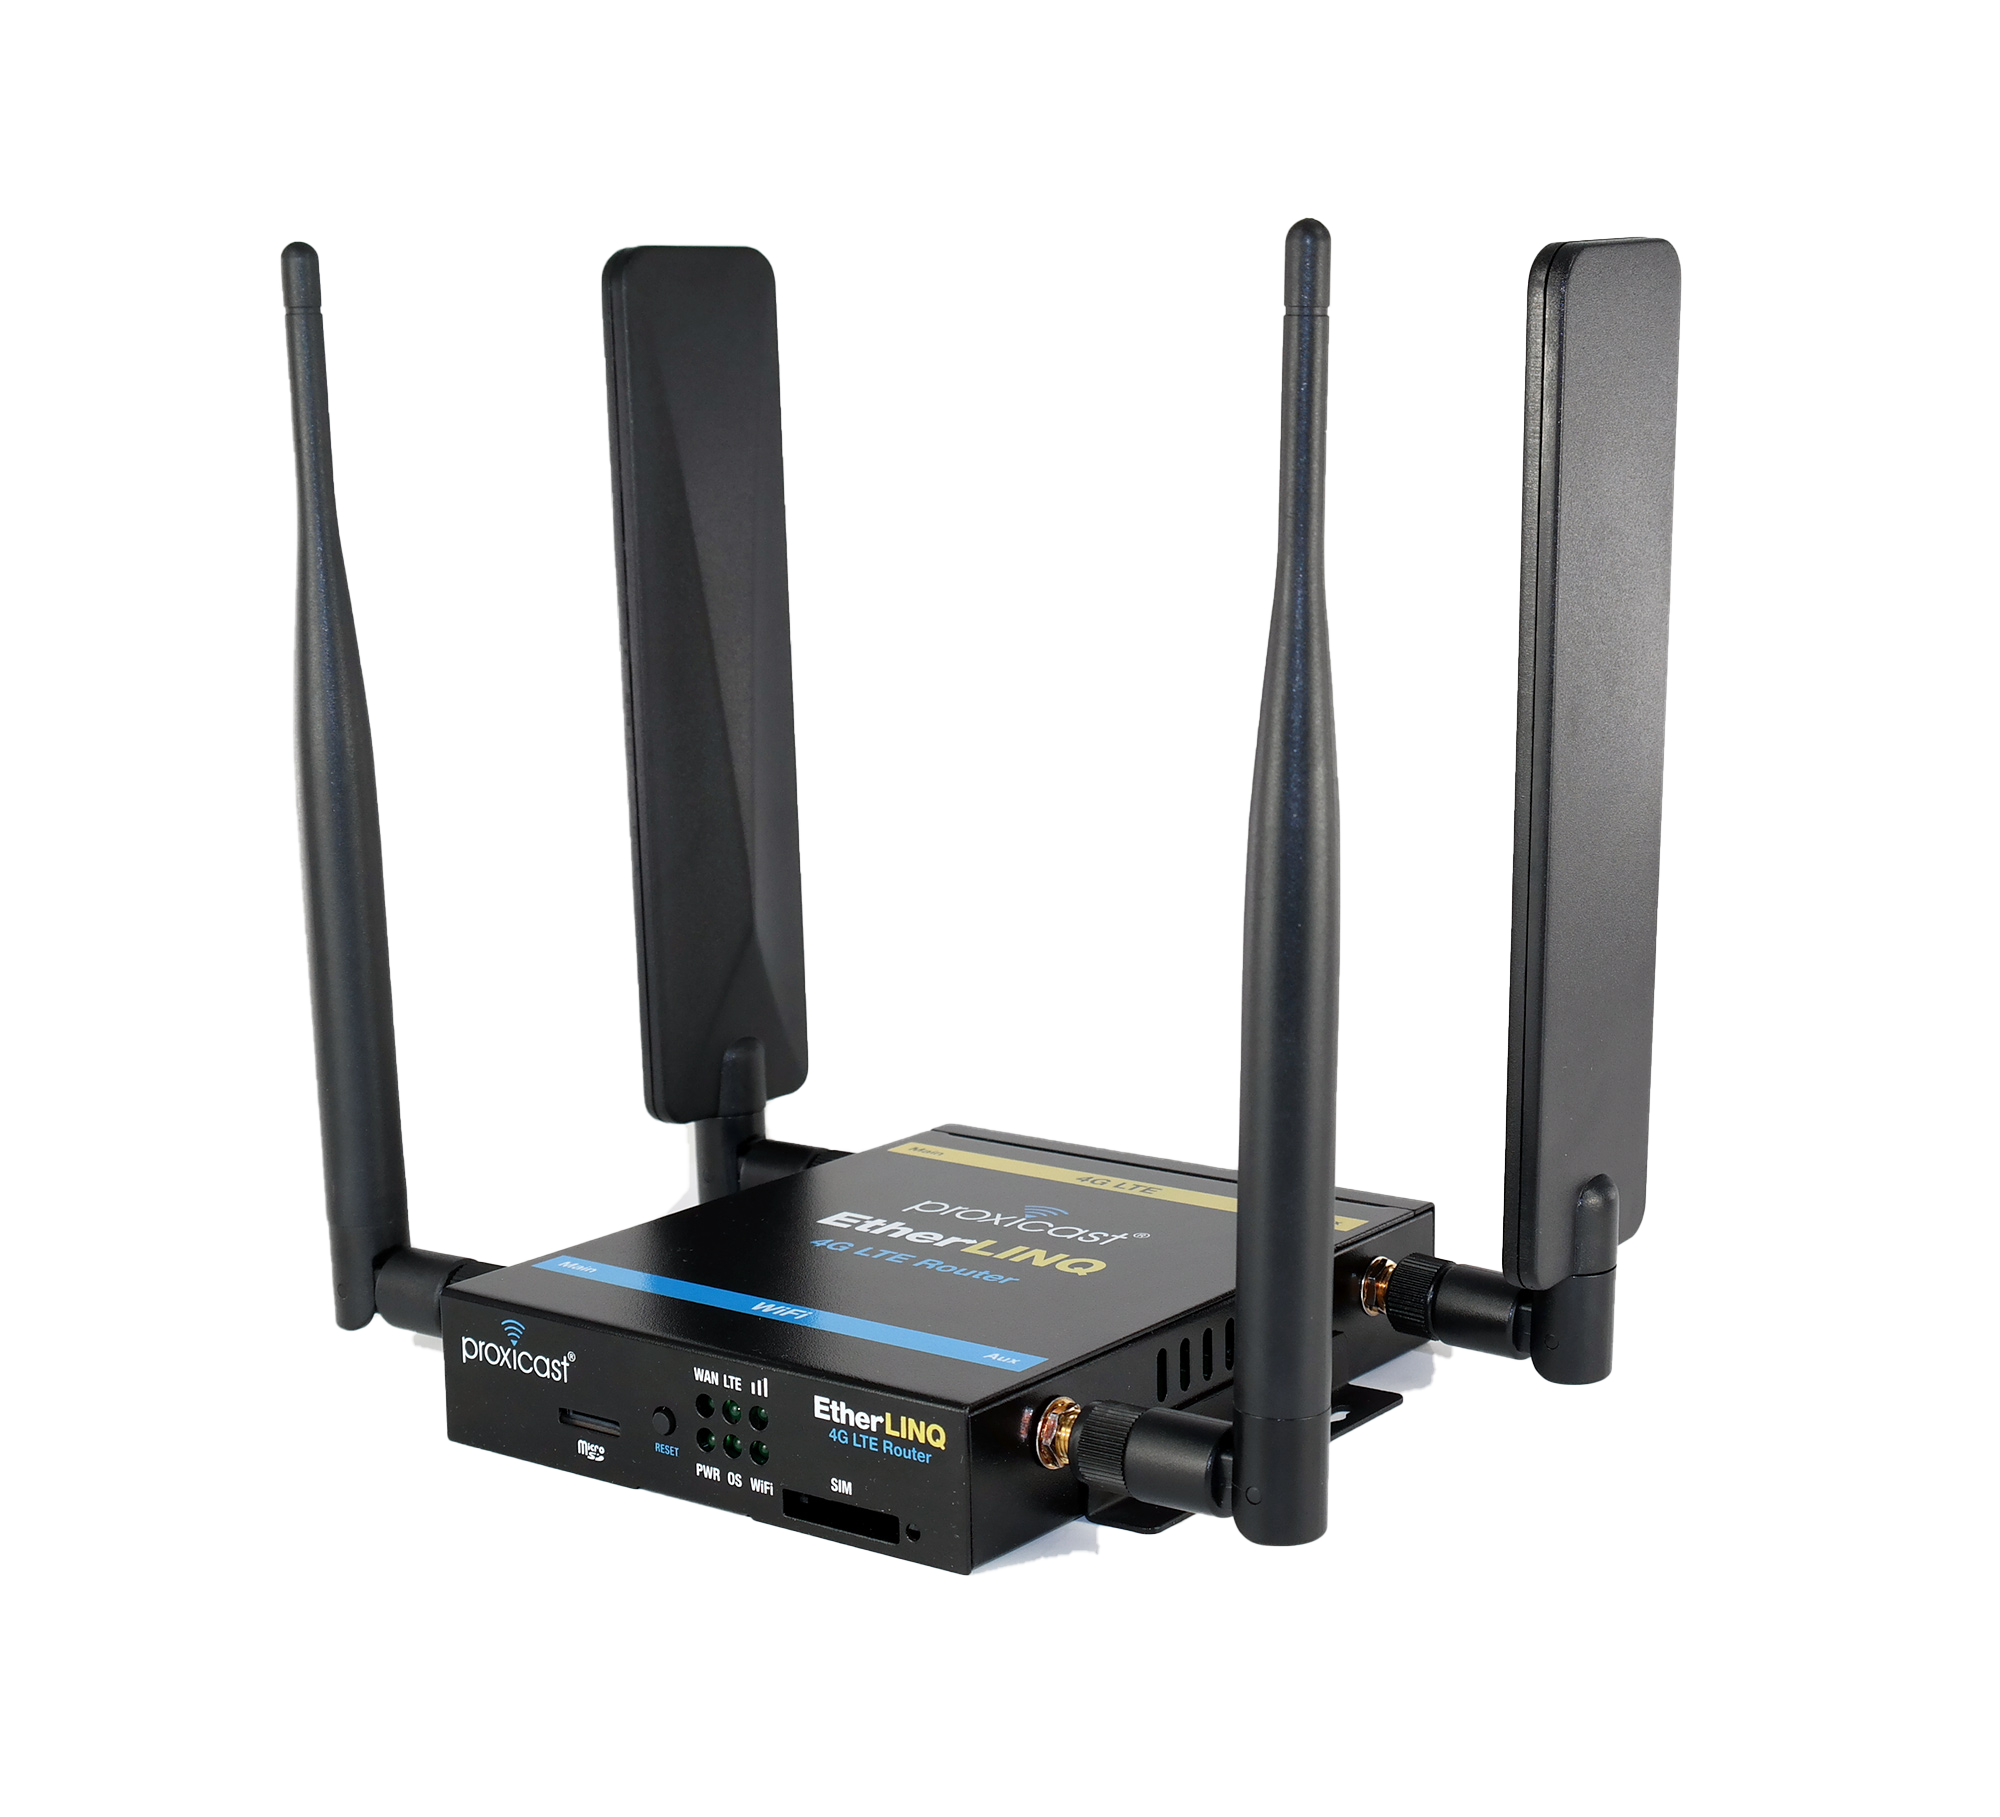 have mestre vogn Proxicast: EtherLINQ 4G/LTE SIM Router with WiFi, VPN, Firewall